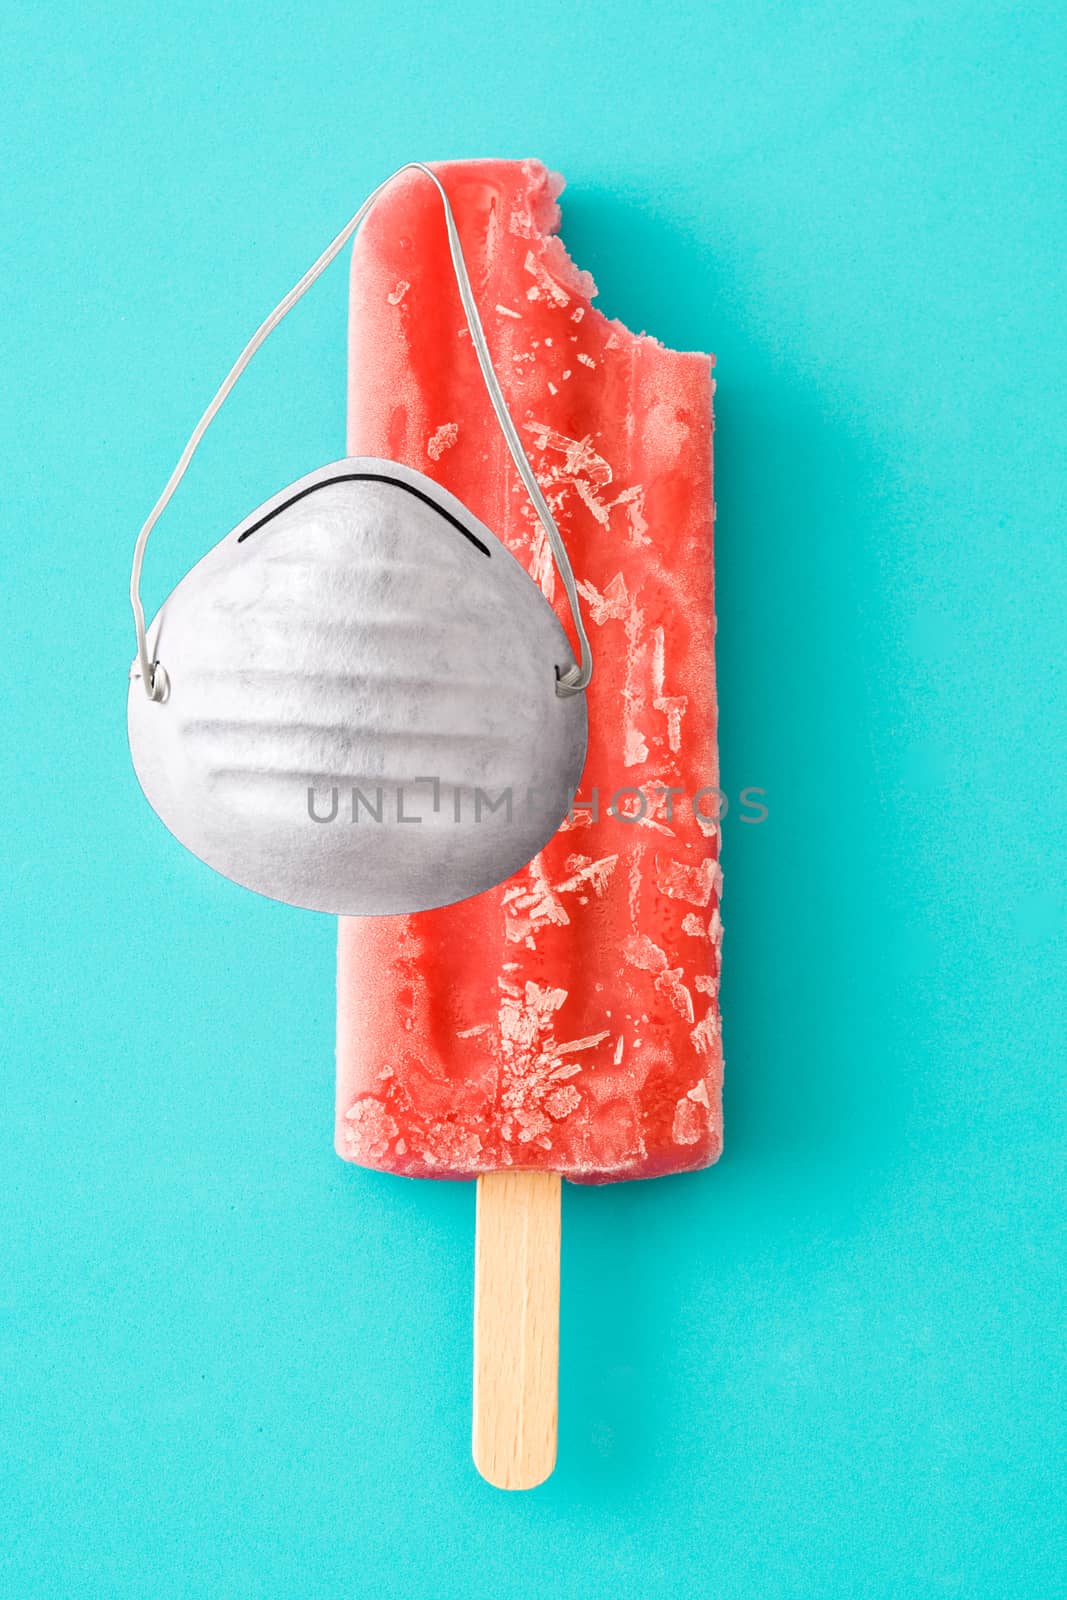 Strawberry popsicles with protective face mask on blue background